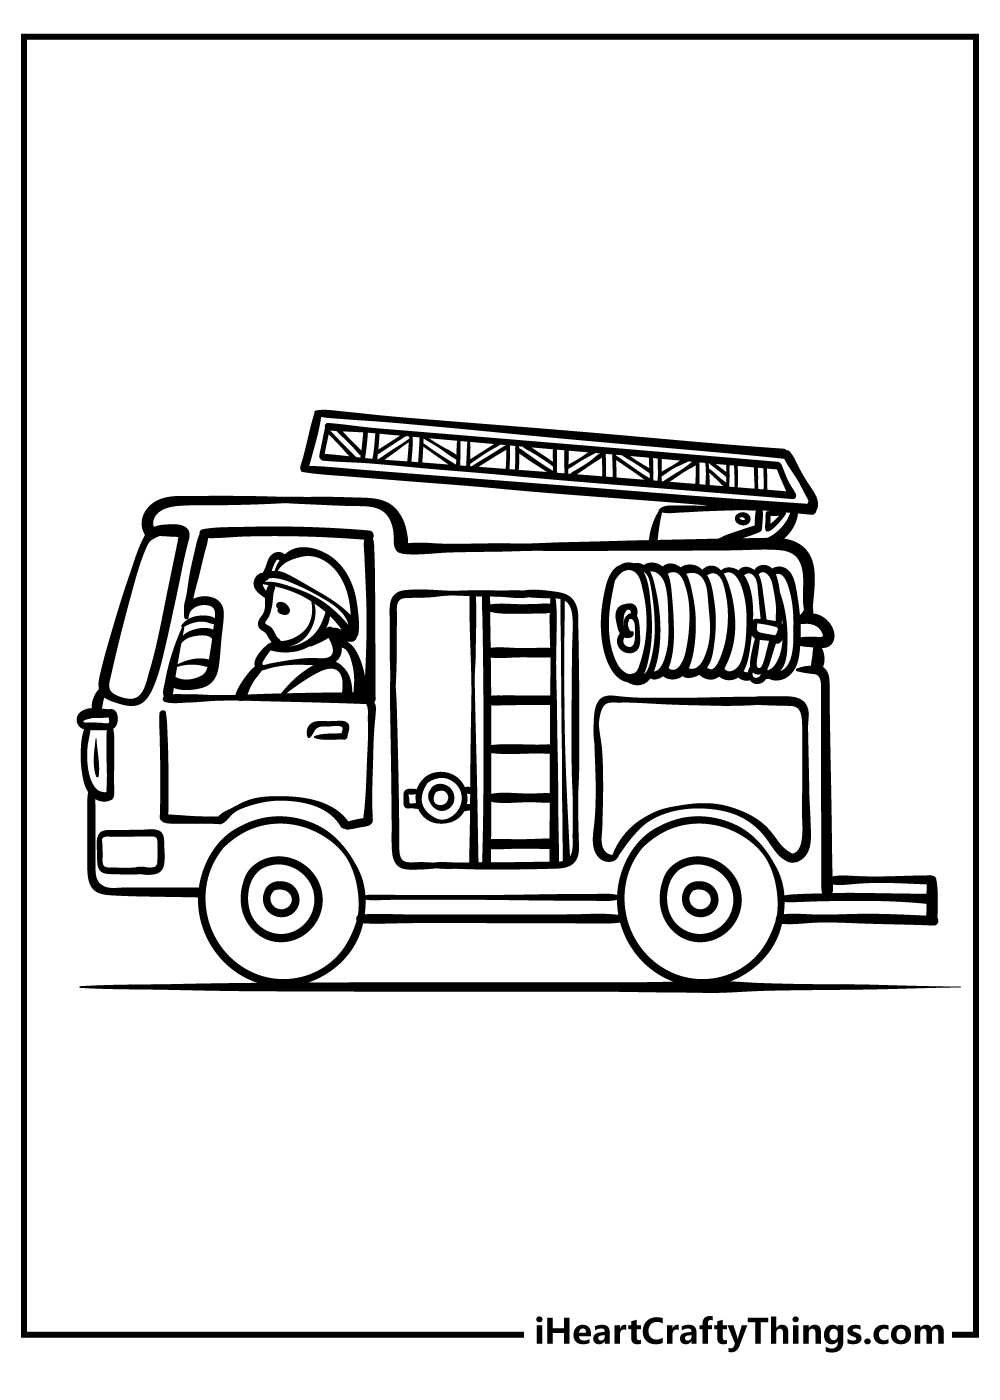 Fire Truck Coloring Sheet for children free download